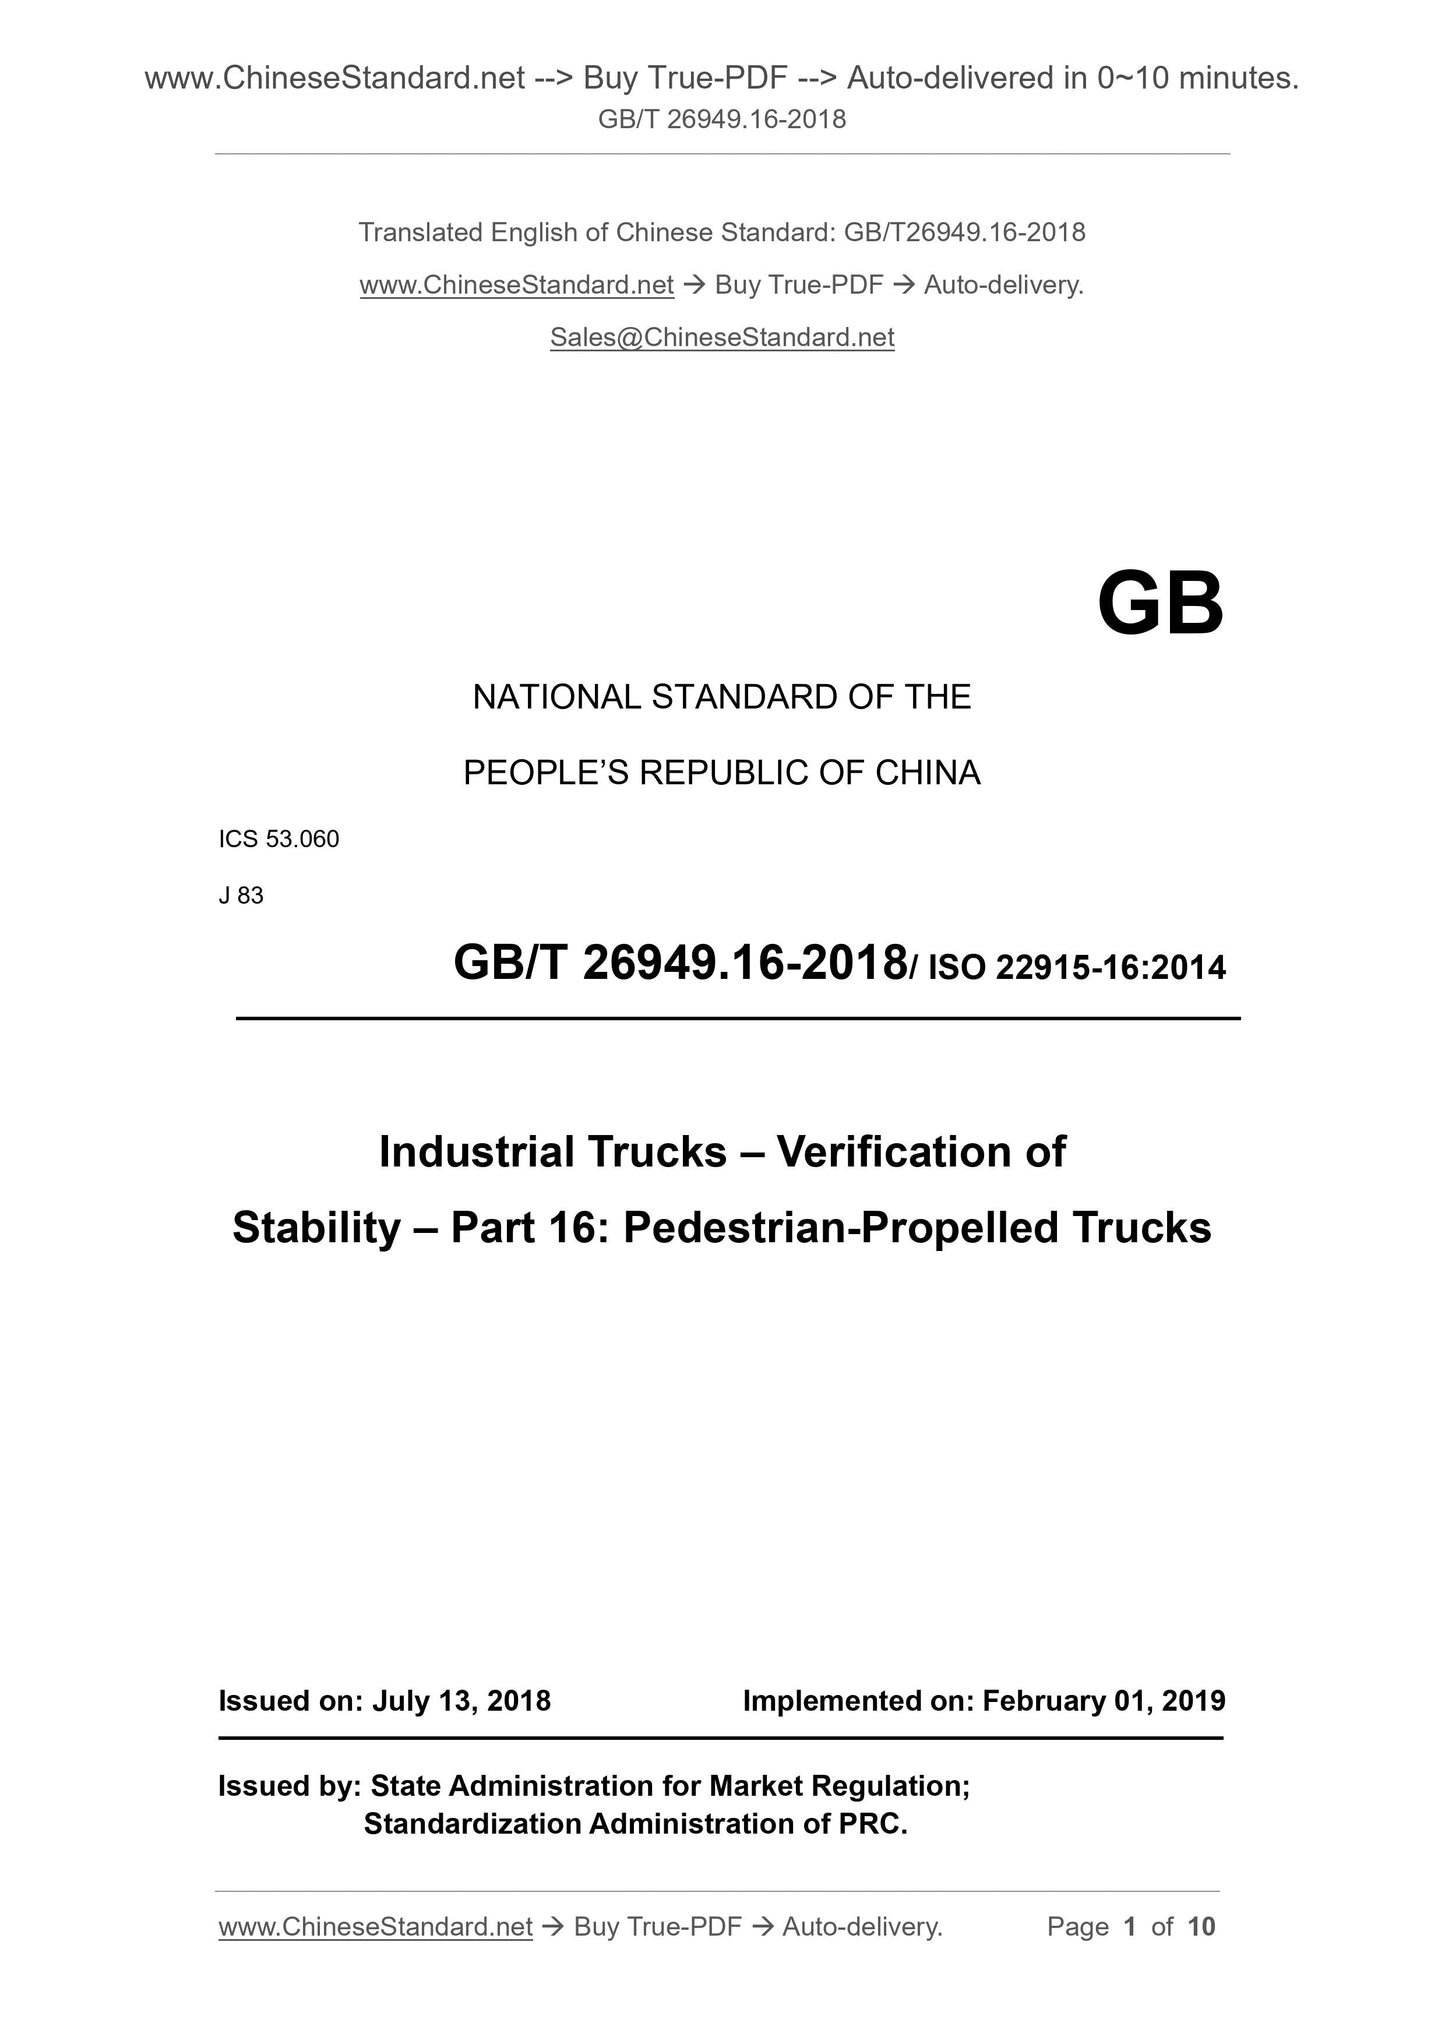 GB/T 26949.16-2018 Page 1